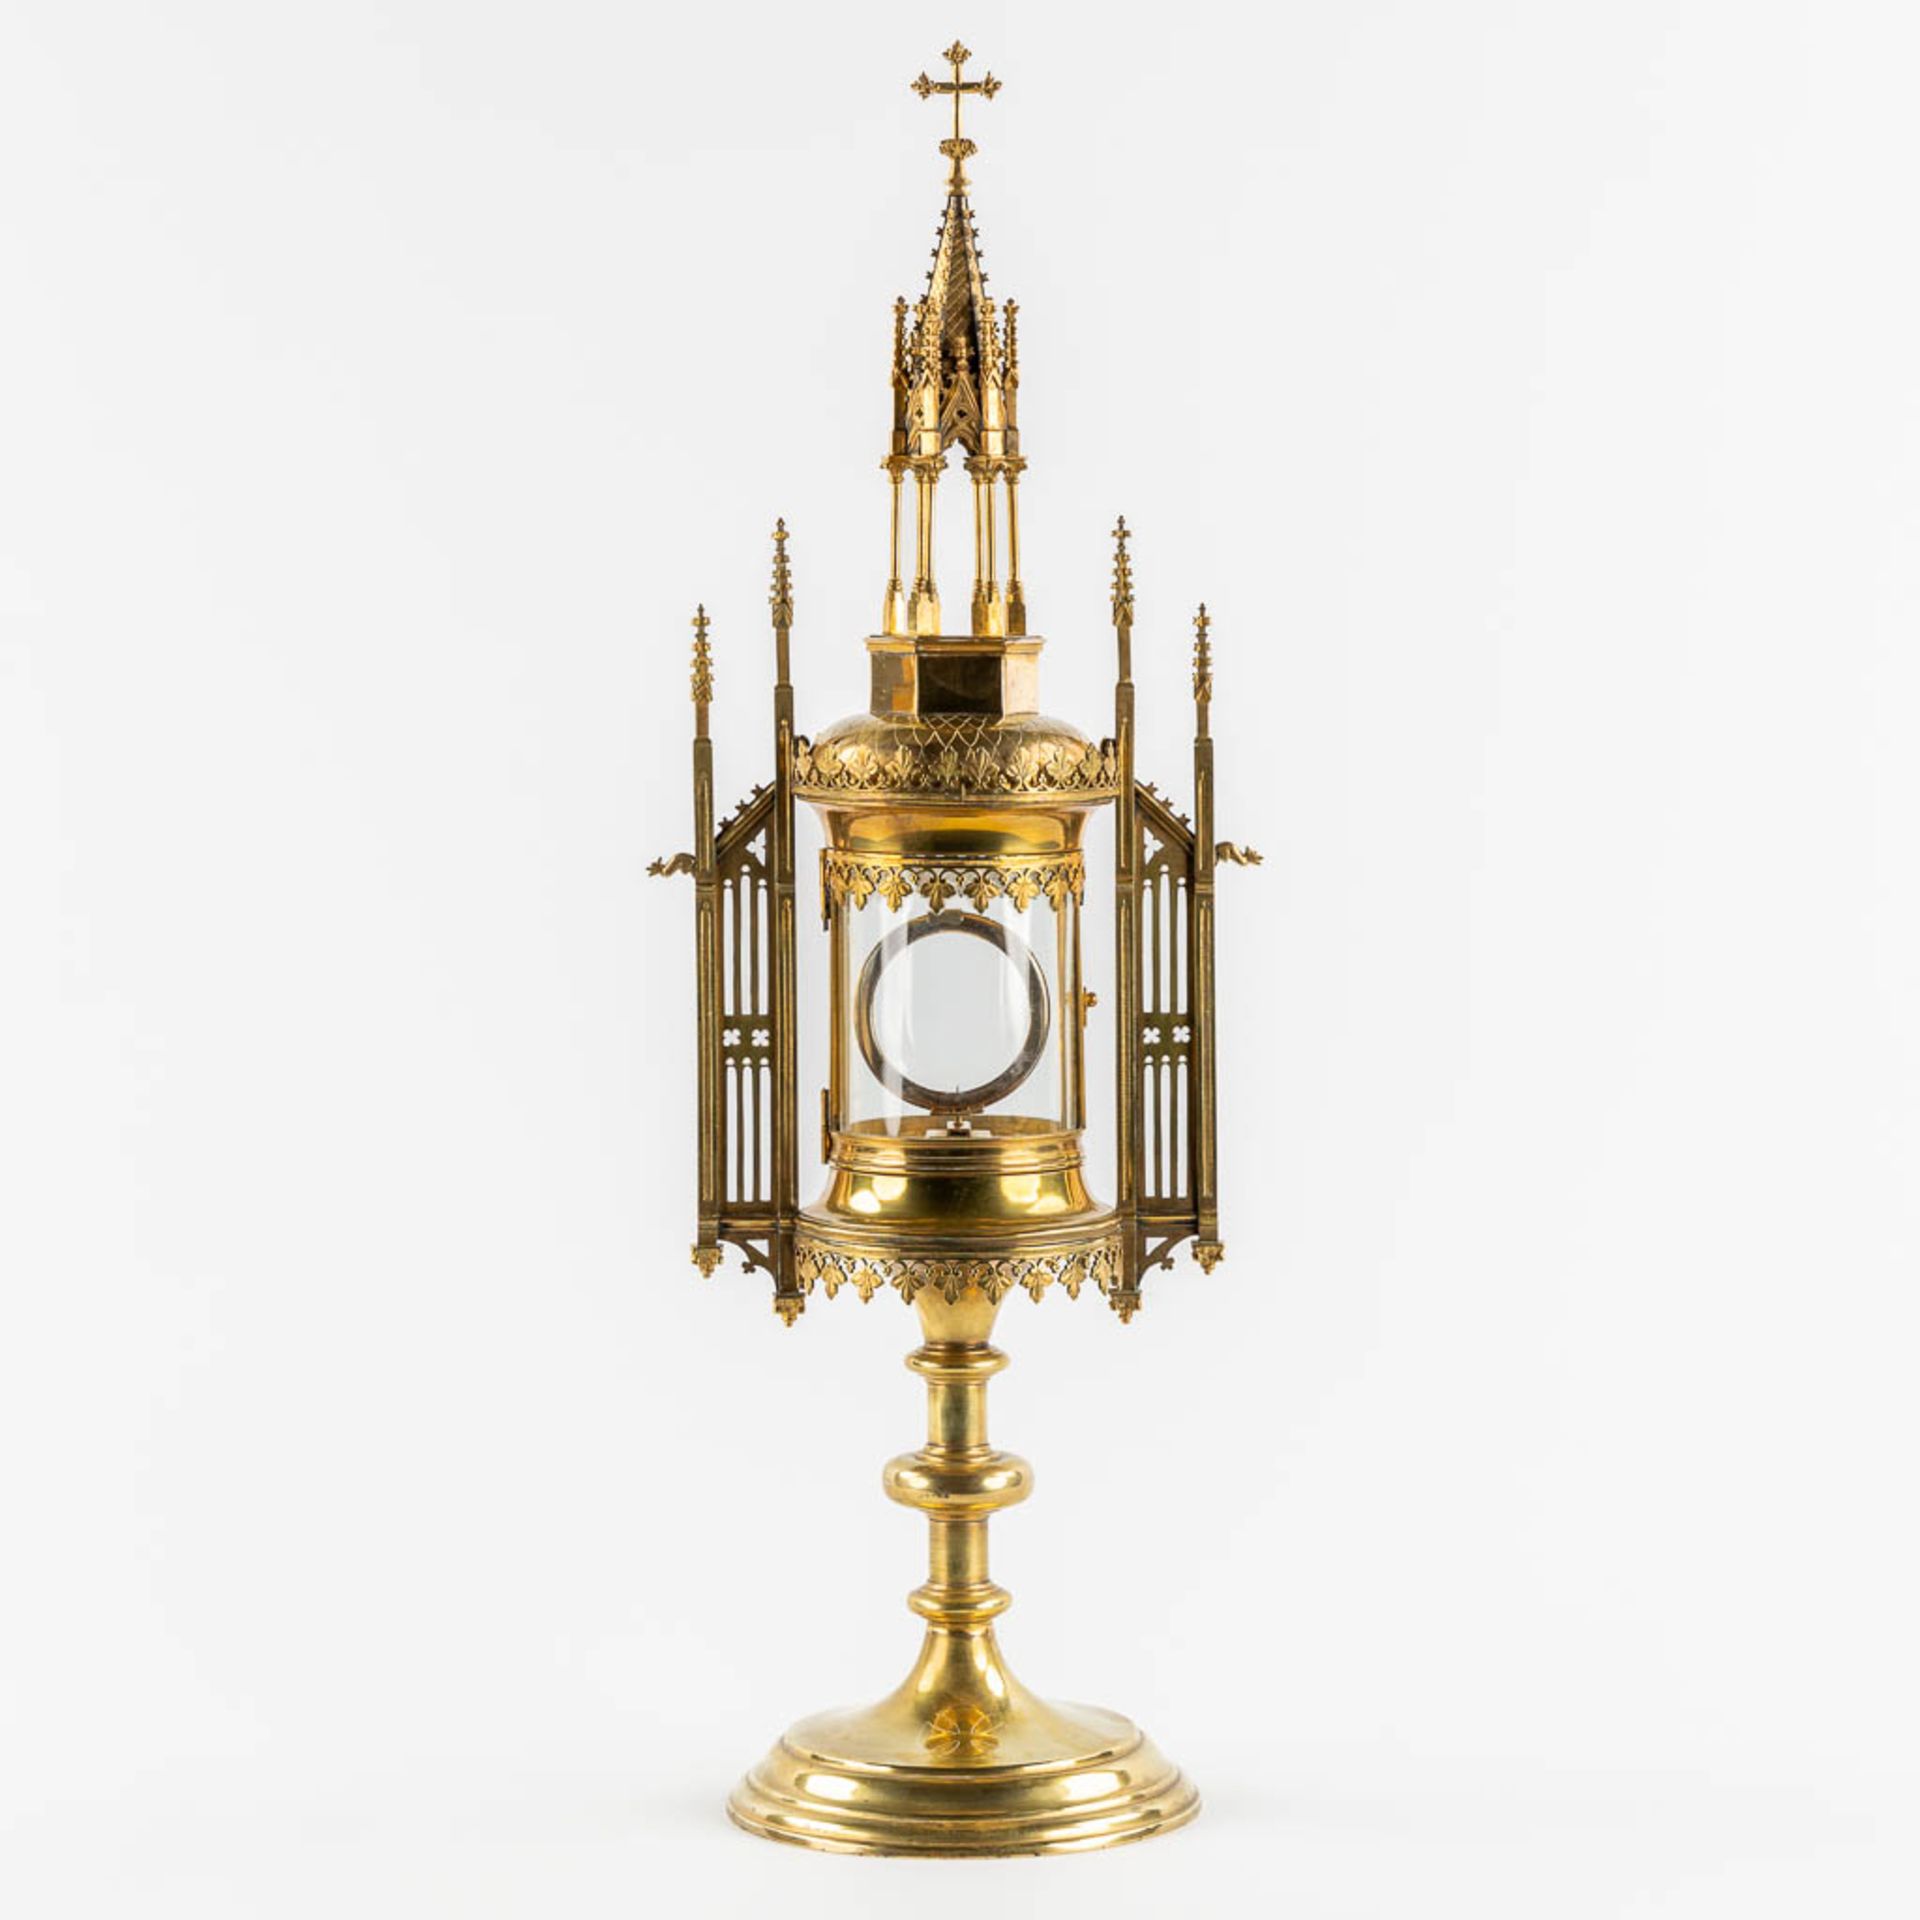 Auguste Moreeuw, Brugge. A tower monstrance, gilt brass in gothic revival style. (L:15,5 x W:20 x H: